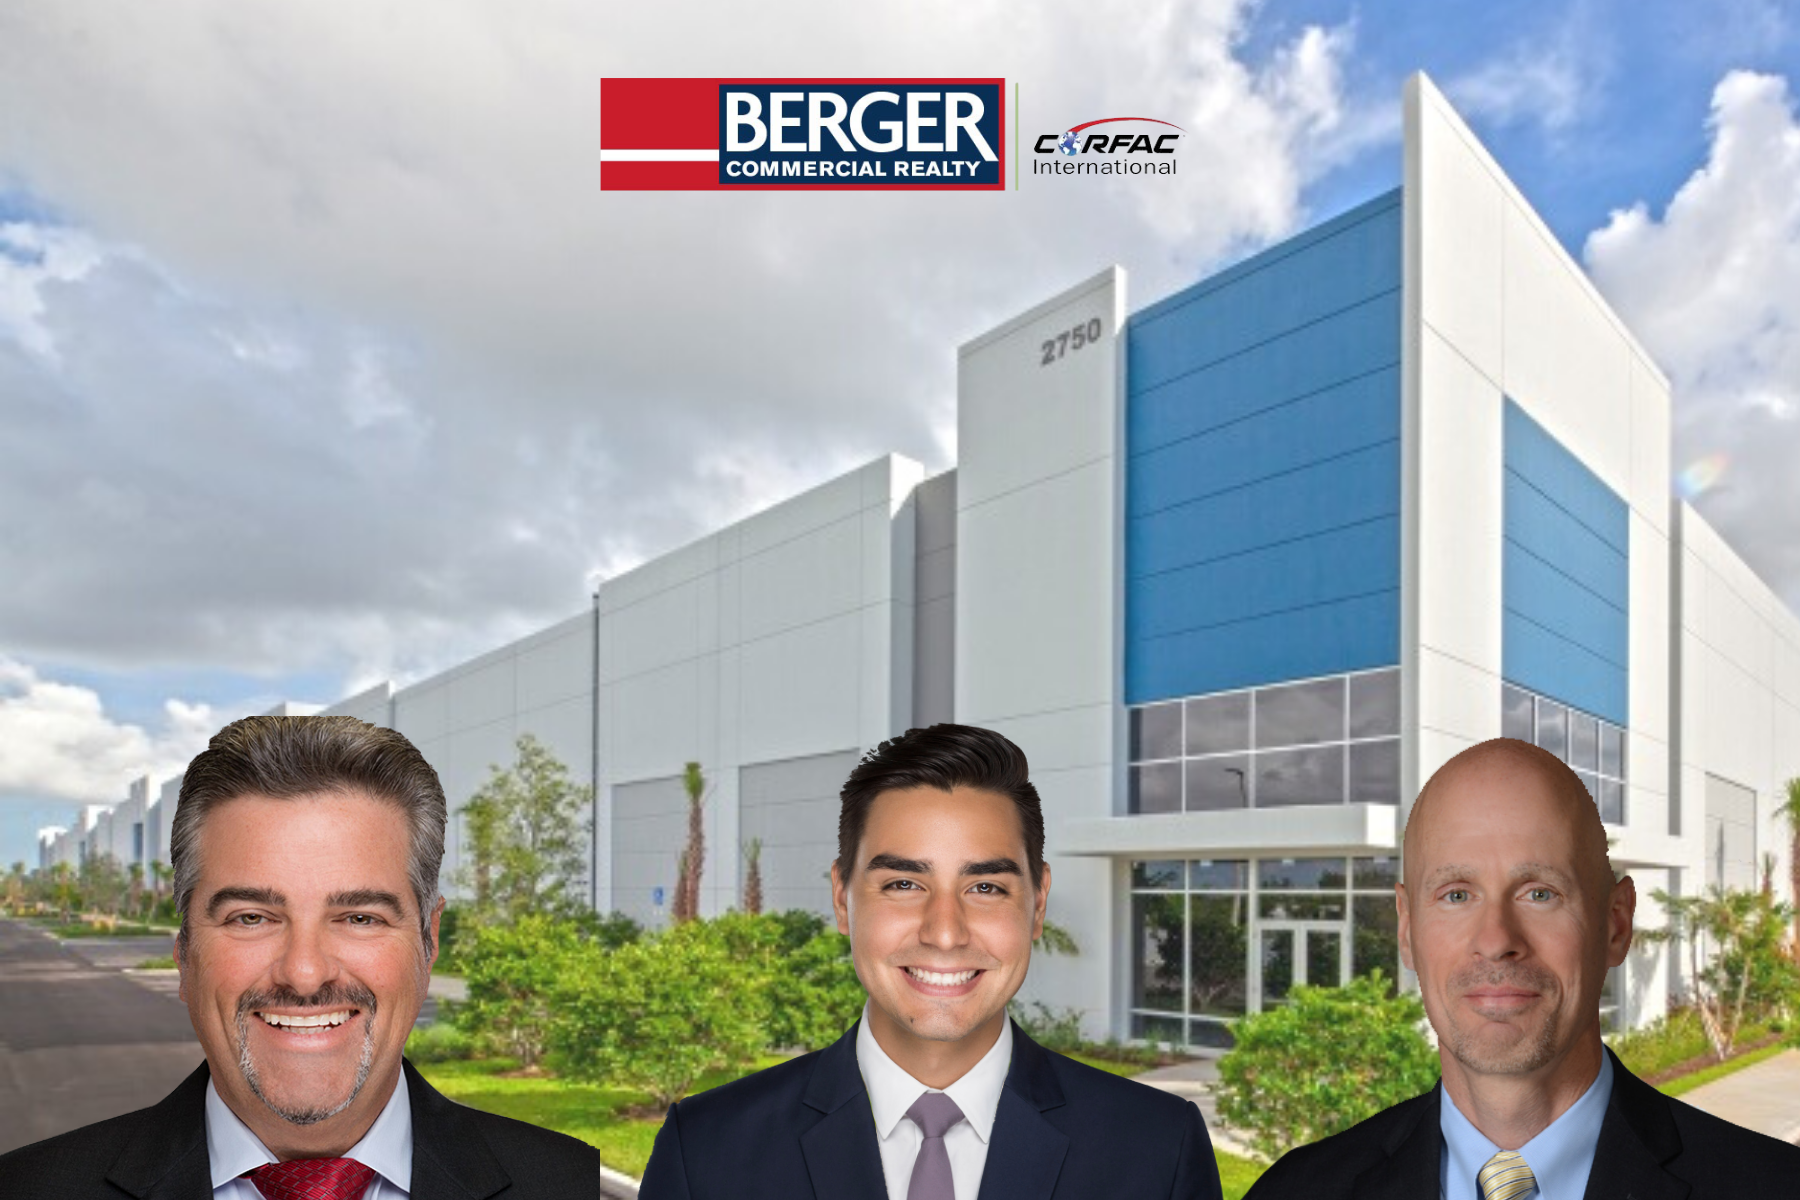 Berger Commercial Realty’s Joe Byrnes, Keith Graves, CCIM & John Forman Welcome 97,000-SF Tenant To Bridge Point 595